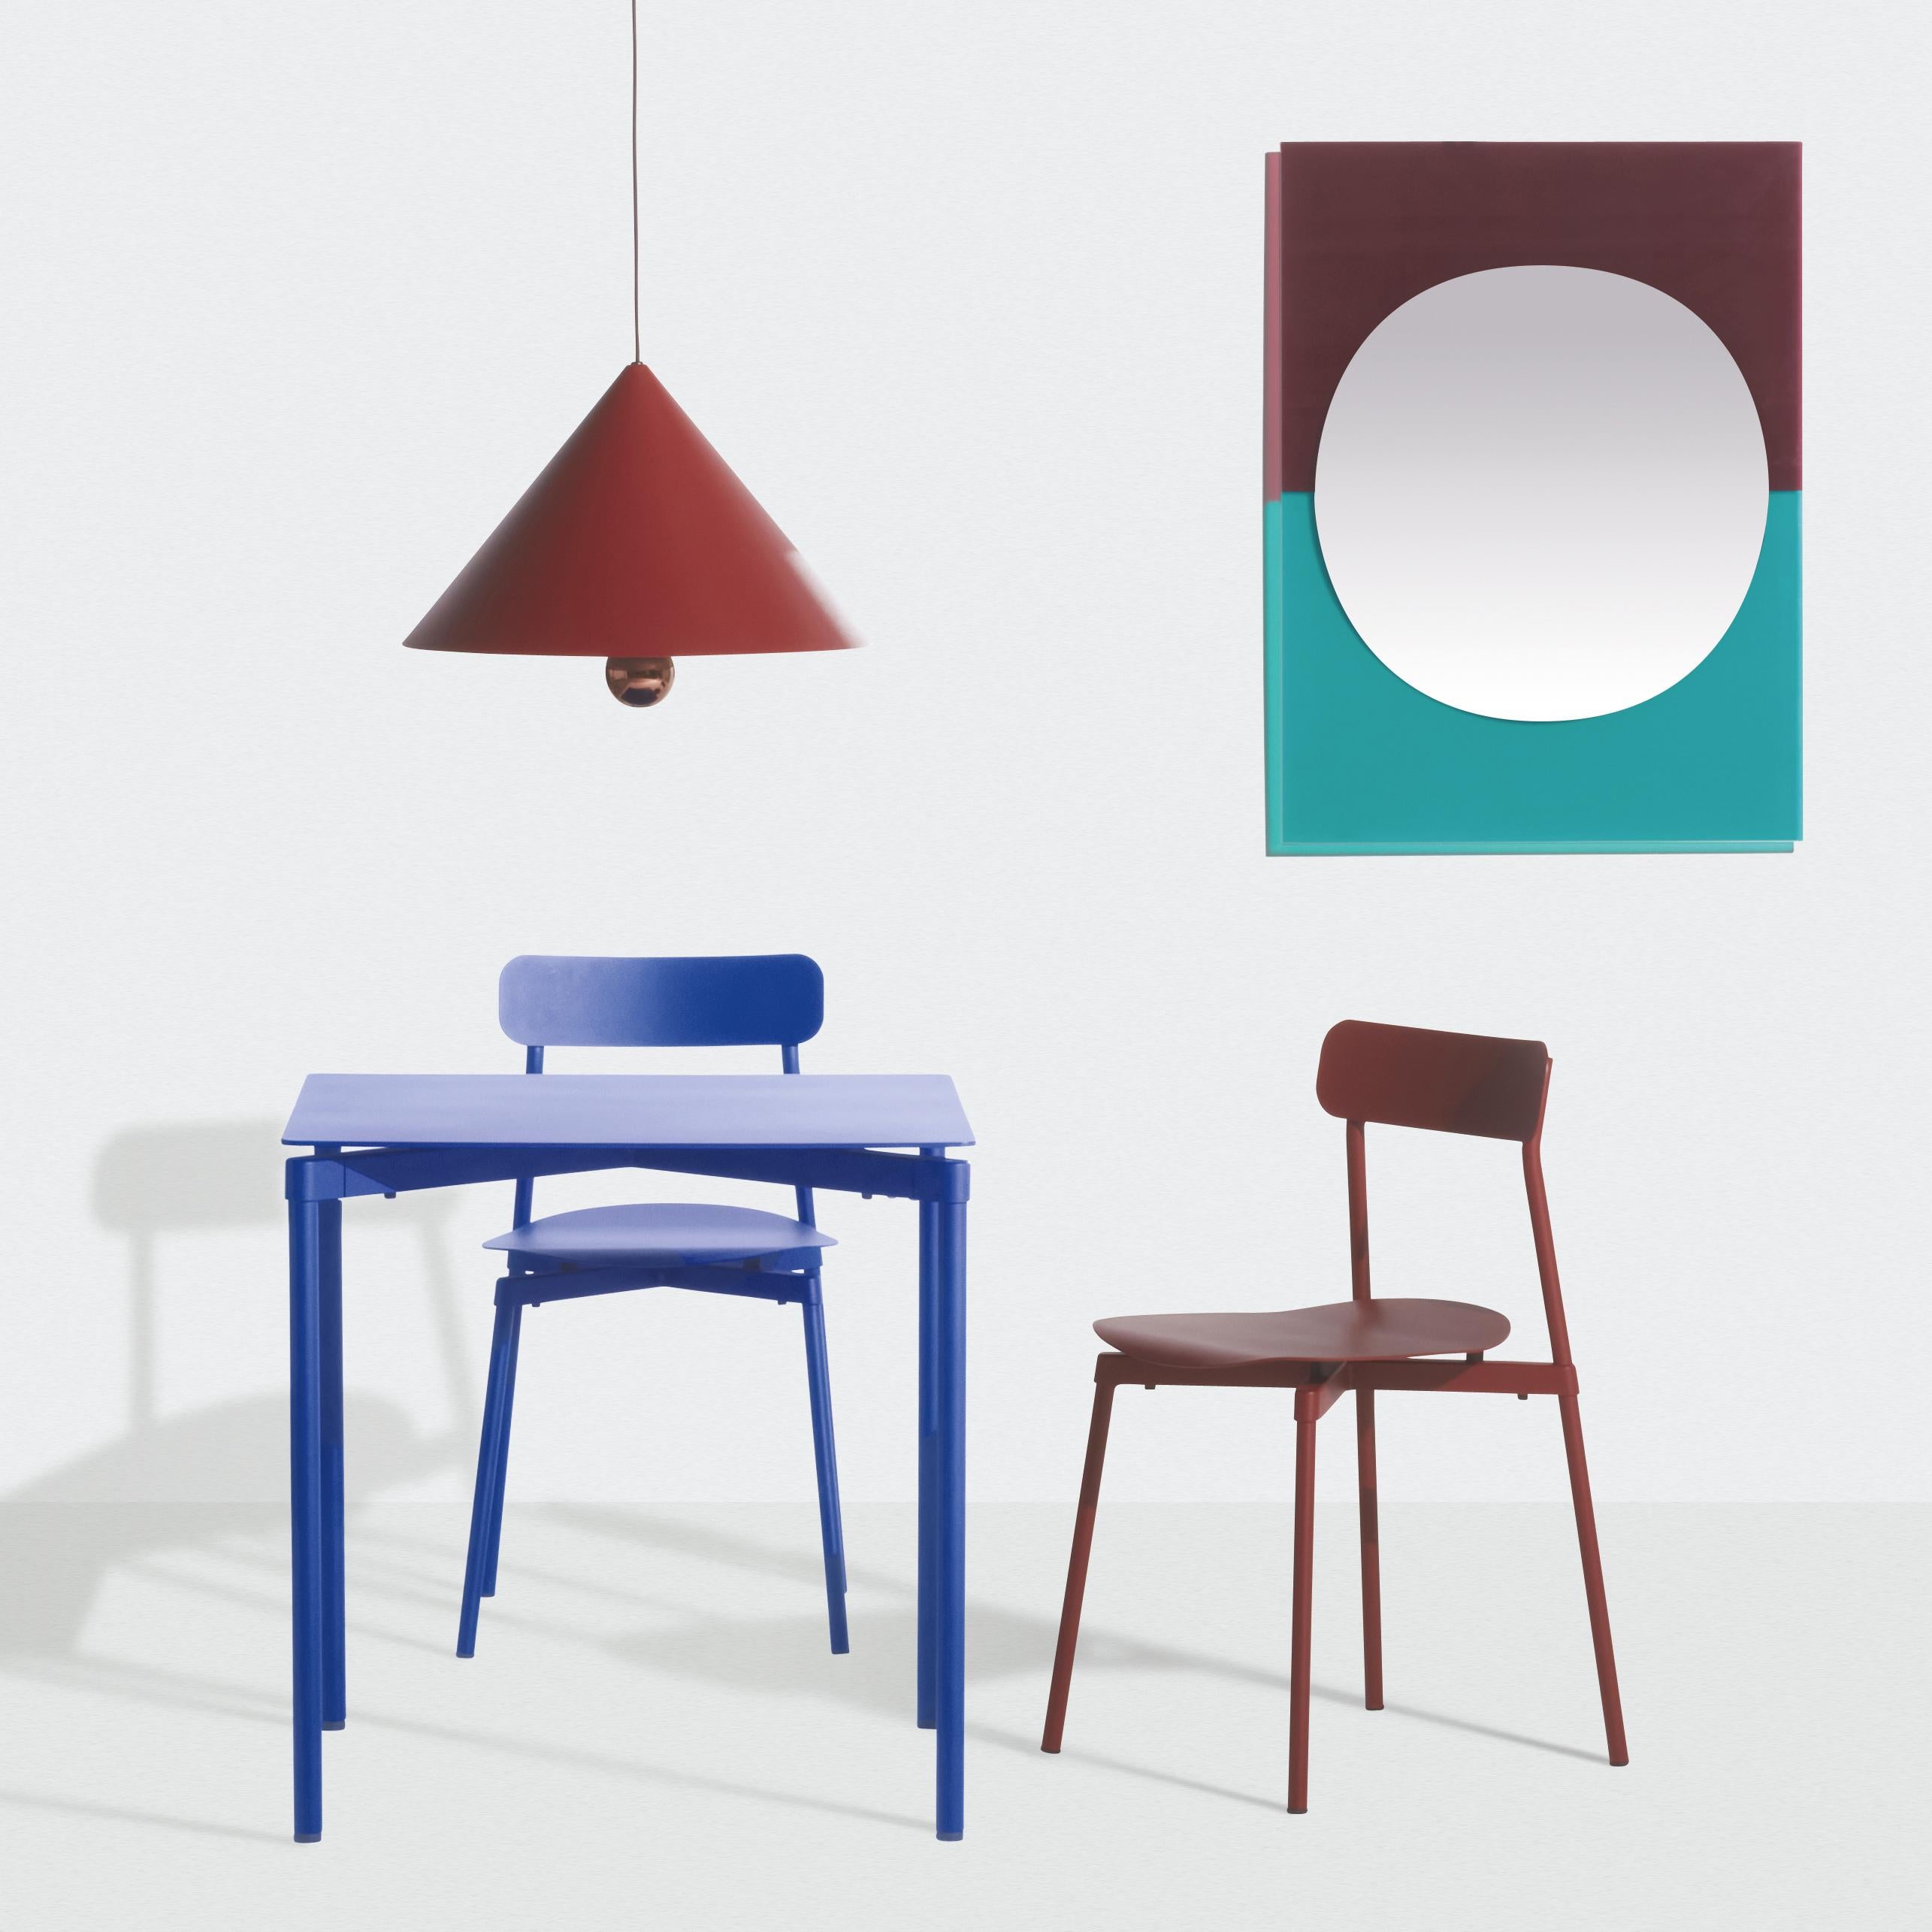 The Wander Medium Mirror from Petite Friture is available in three different color combinations, offering a variety of creative possibilities. They invite the mind to escape into a graphic, playful space. The collection is designed as a window to